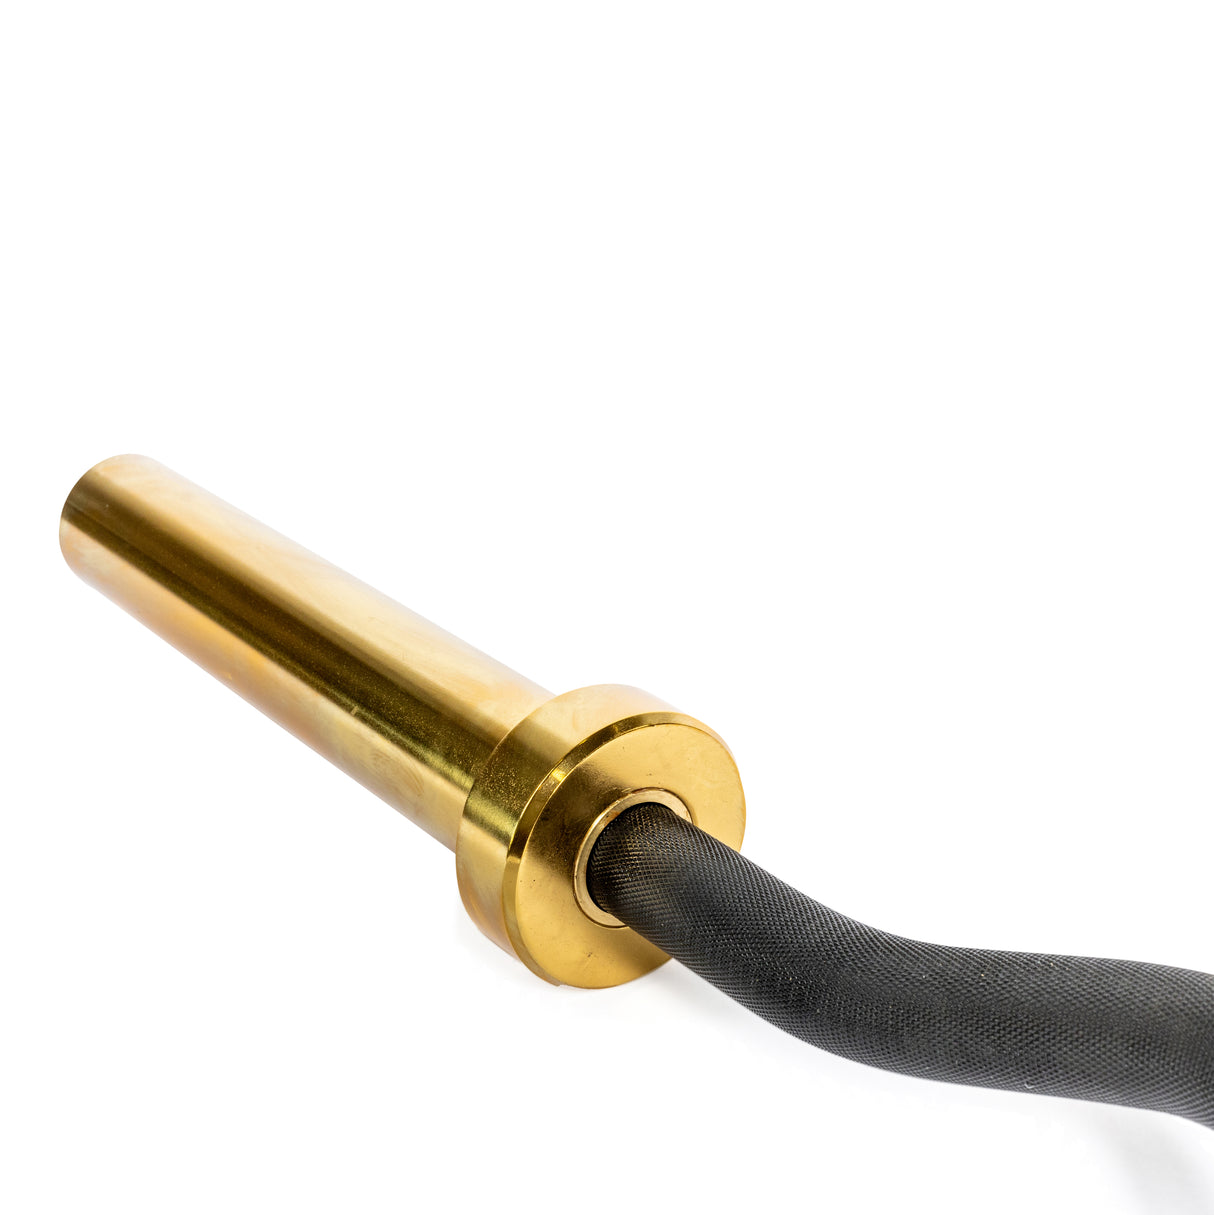 Full photo of the Standard 54.5" EZ curl bar with gold sleves